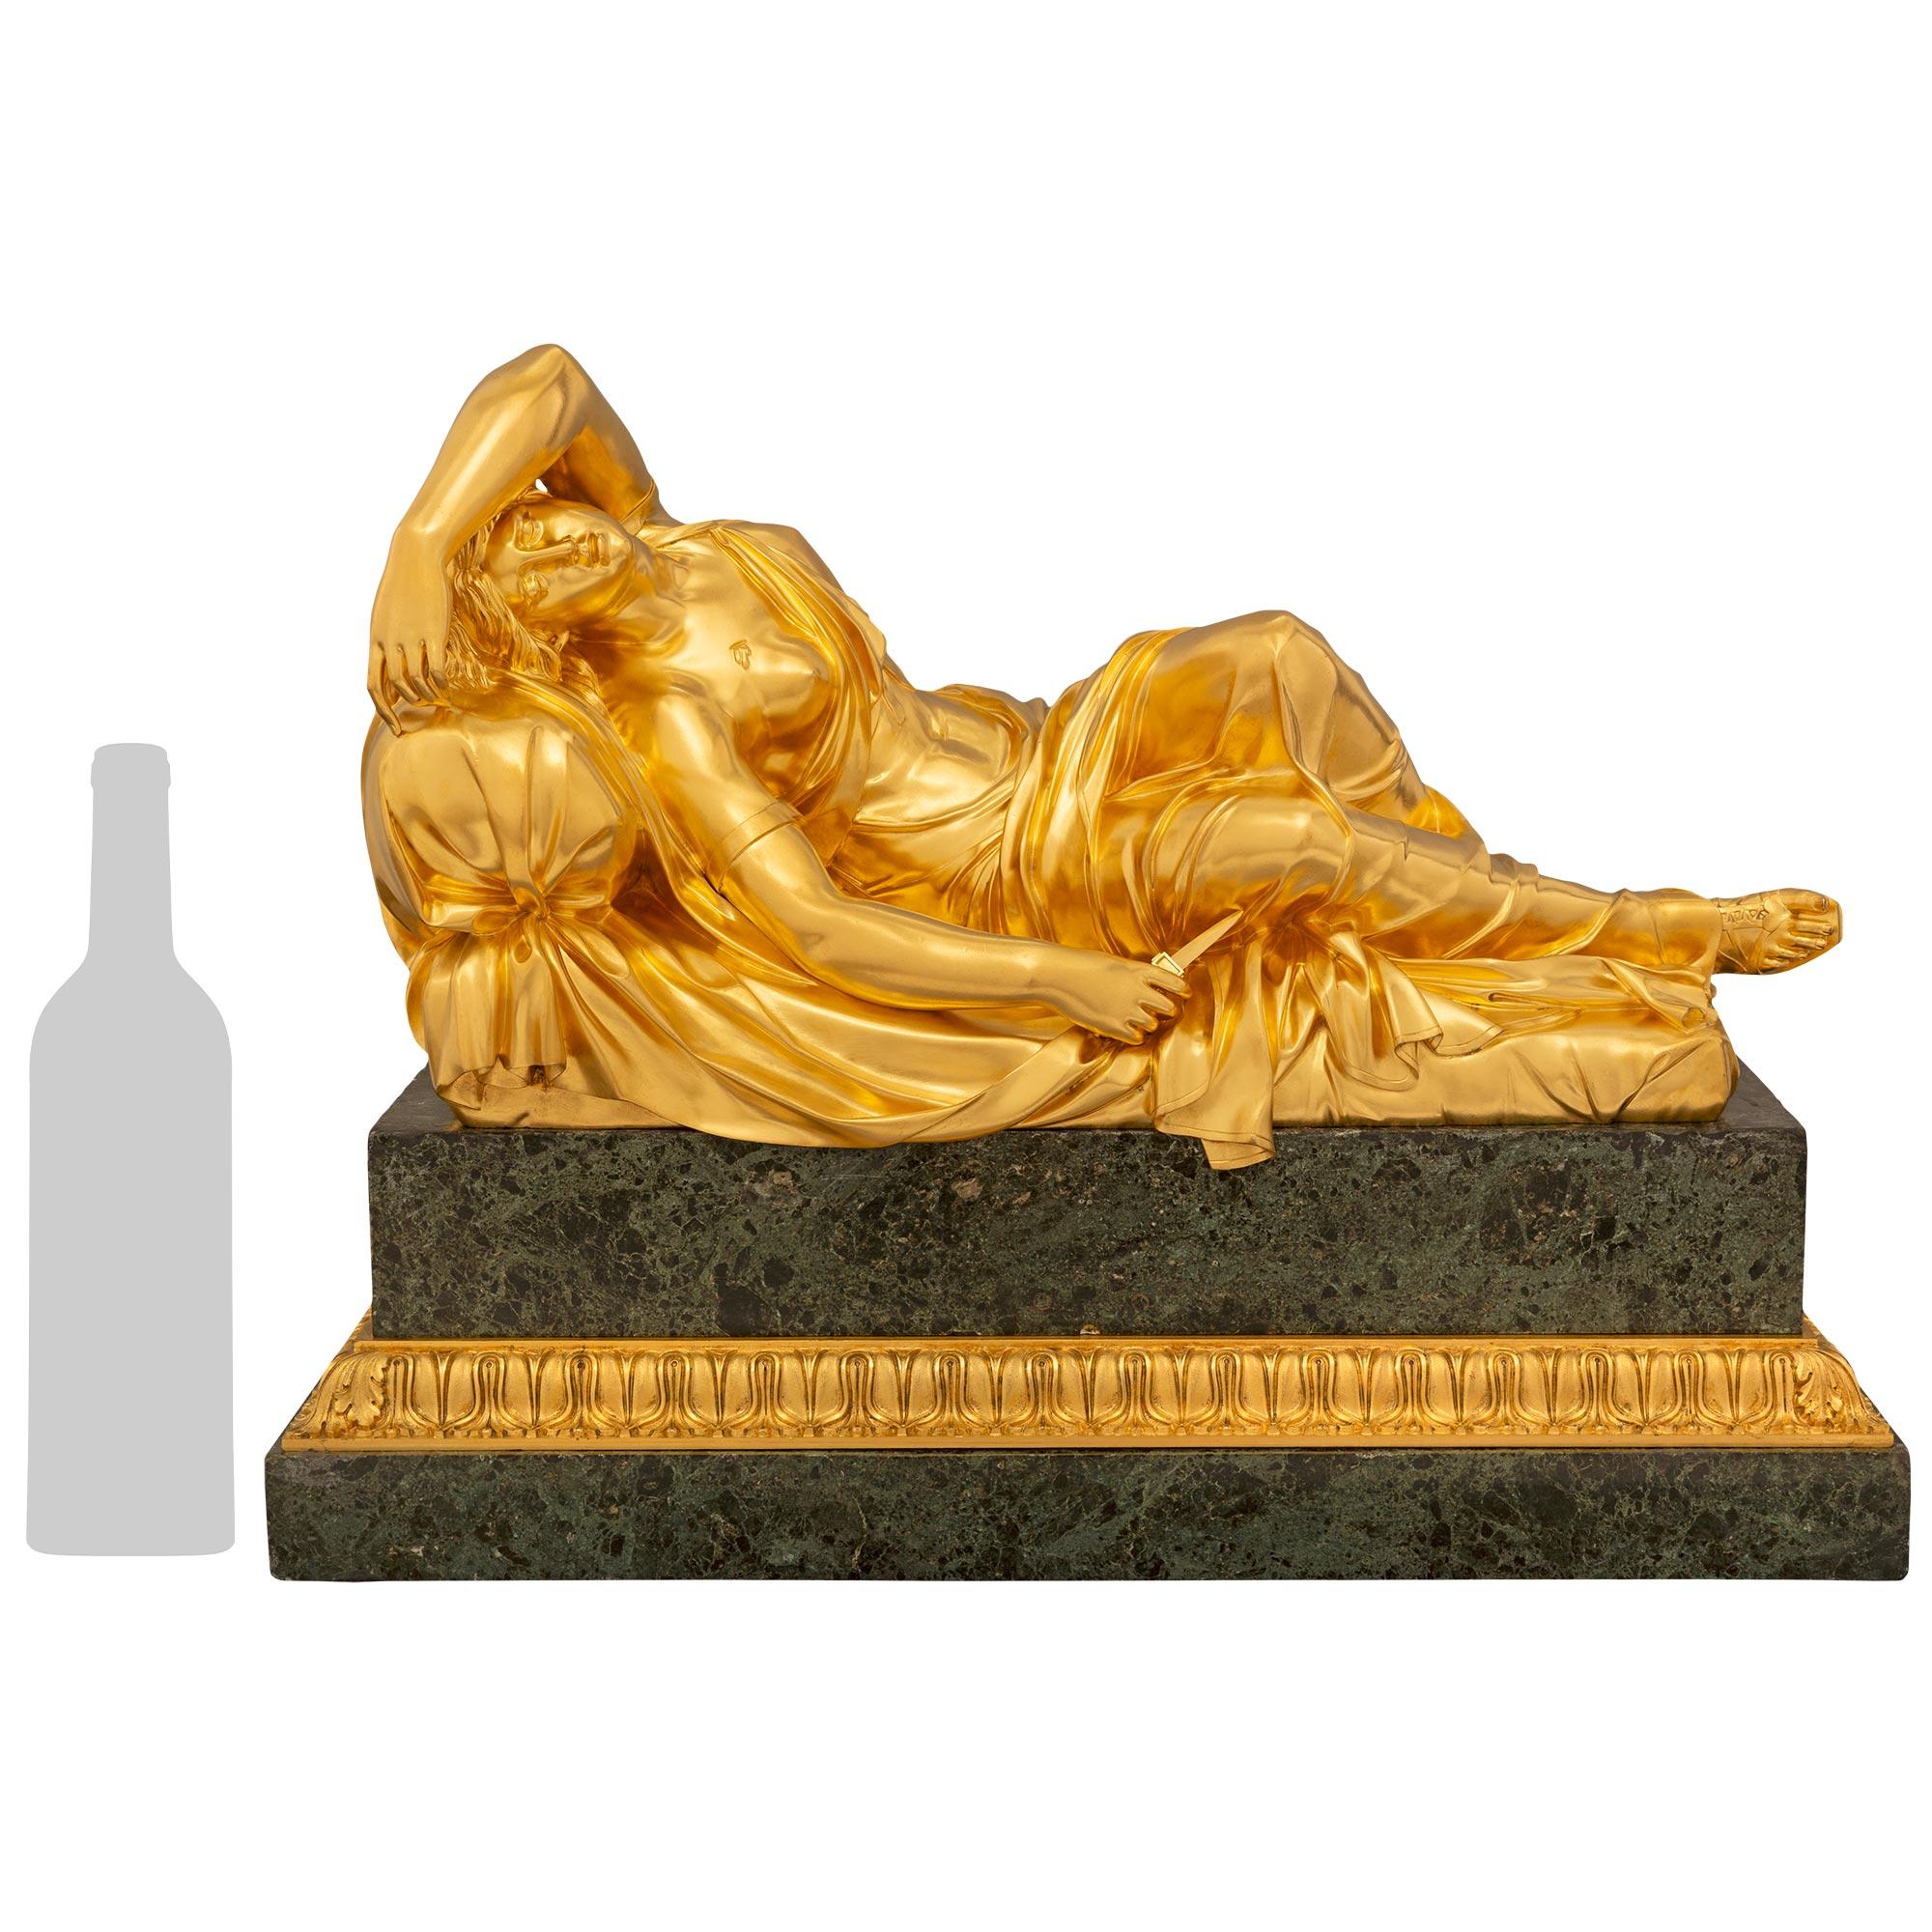 An impressive French 19th century Ormolu and Pietra Braschia marble sculpture of Lucretia. The sculpture is raised by a rectangular Pietra Braschia base with an handsome Coeur de Rai ormolu band. Above is Lucretia laying dying on her bed after